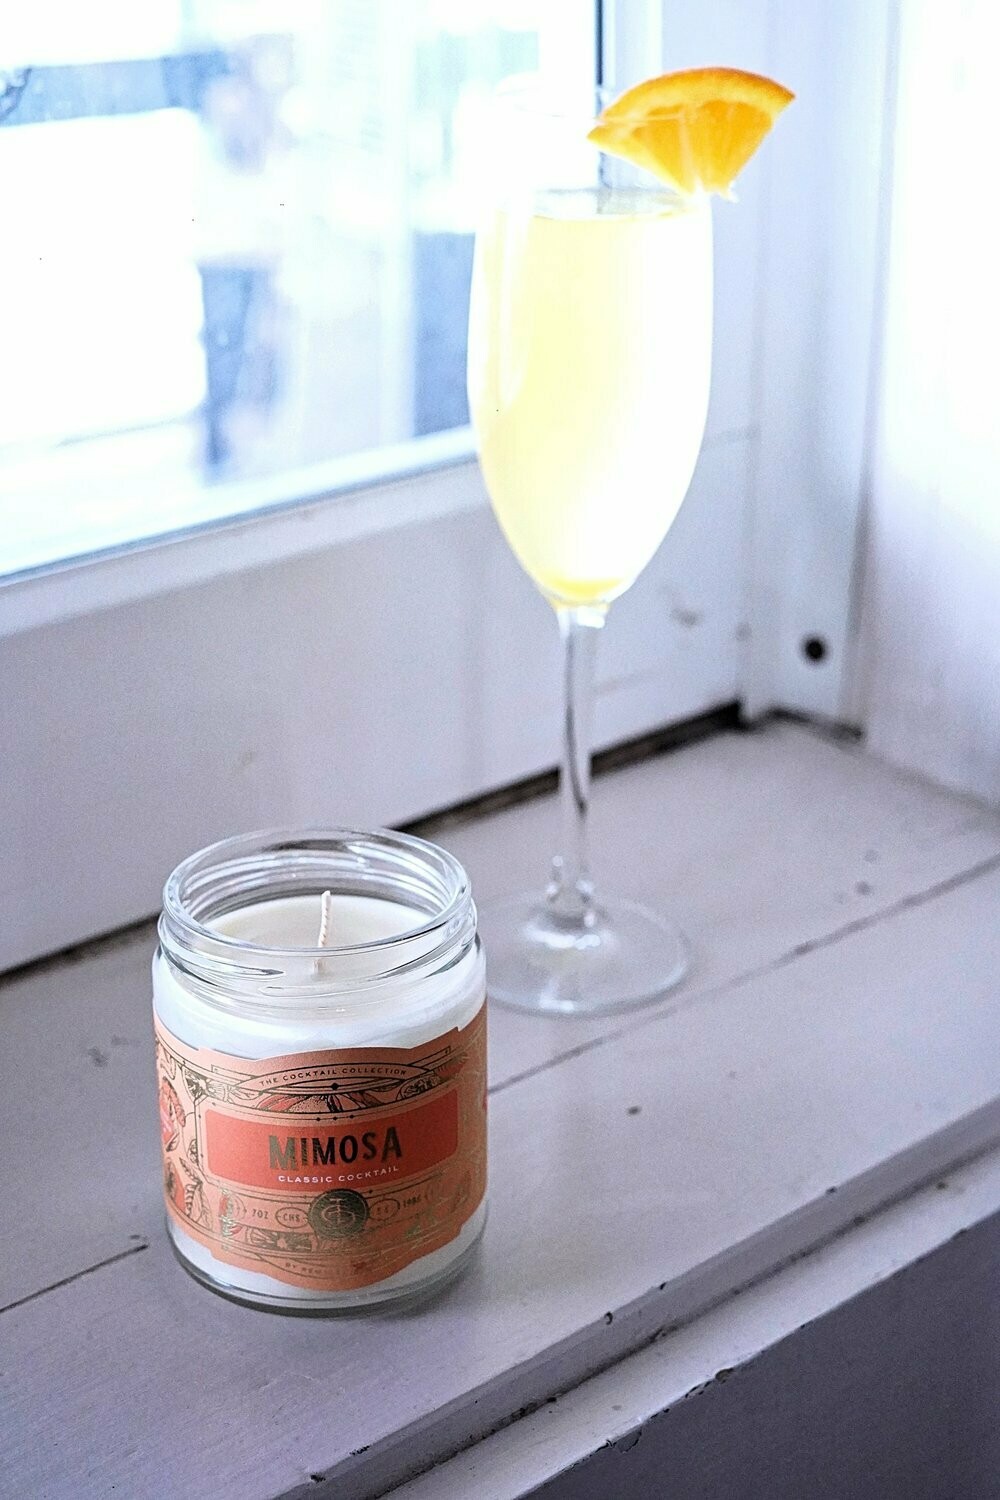 Rewind Mimosa Candle - 7oz